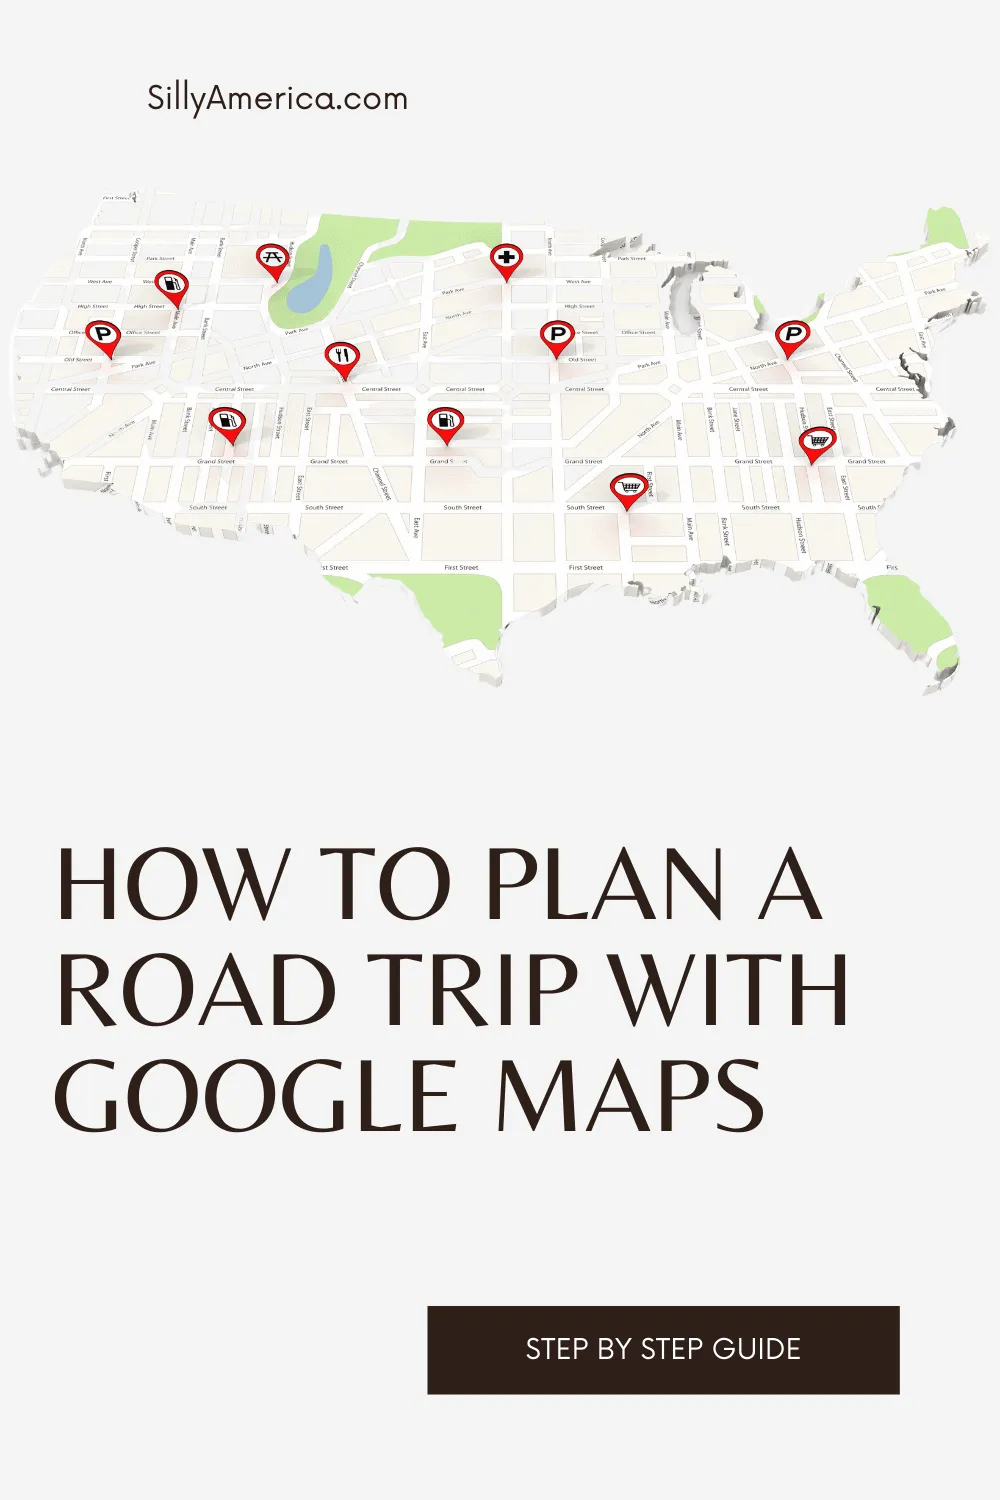 The best method for how to plan a road trip with Google Maps and spreadsheets to plot your road trip route and get directions on your phone. Planning a road trip in Google Maps is easy, allows you to creatively see all your stops, and you can load your road trip map on your phone for easy directions. It's road trip planning made easy! #RoadTripPlanning #RoadTripPlanningTips #RoadTripPlanningMap #RoadTripPlanningList #RoadTripPlanningApp #RoadTripRoute #PlanARoadTrip #GoogleMaps